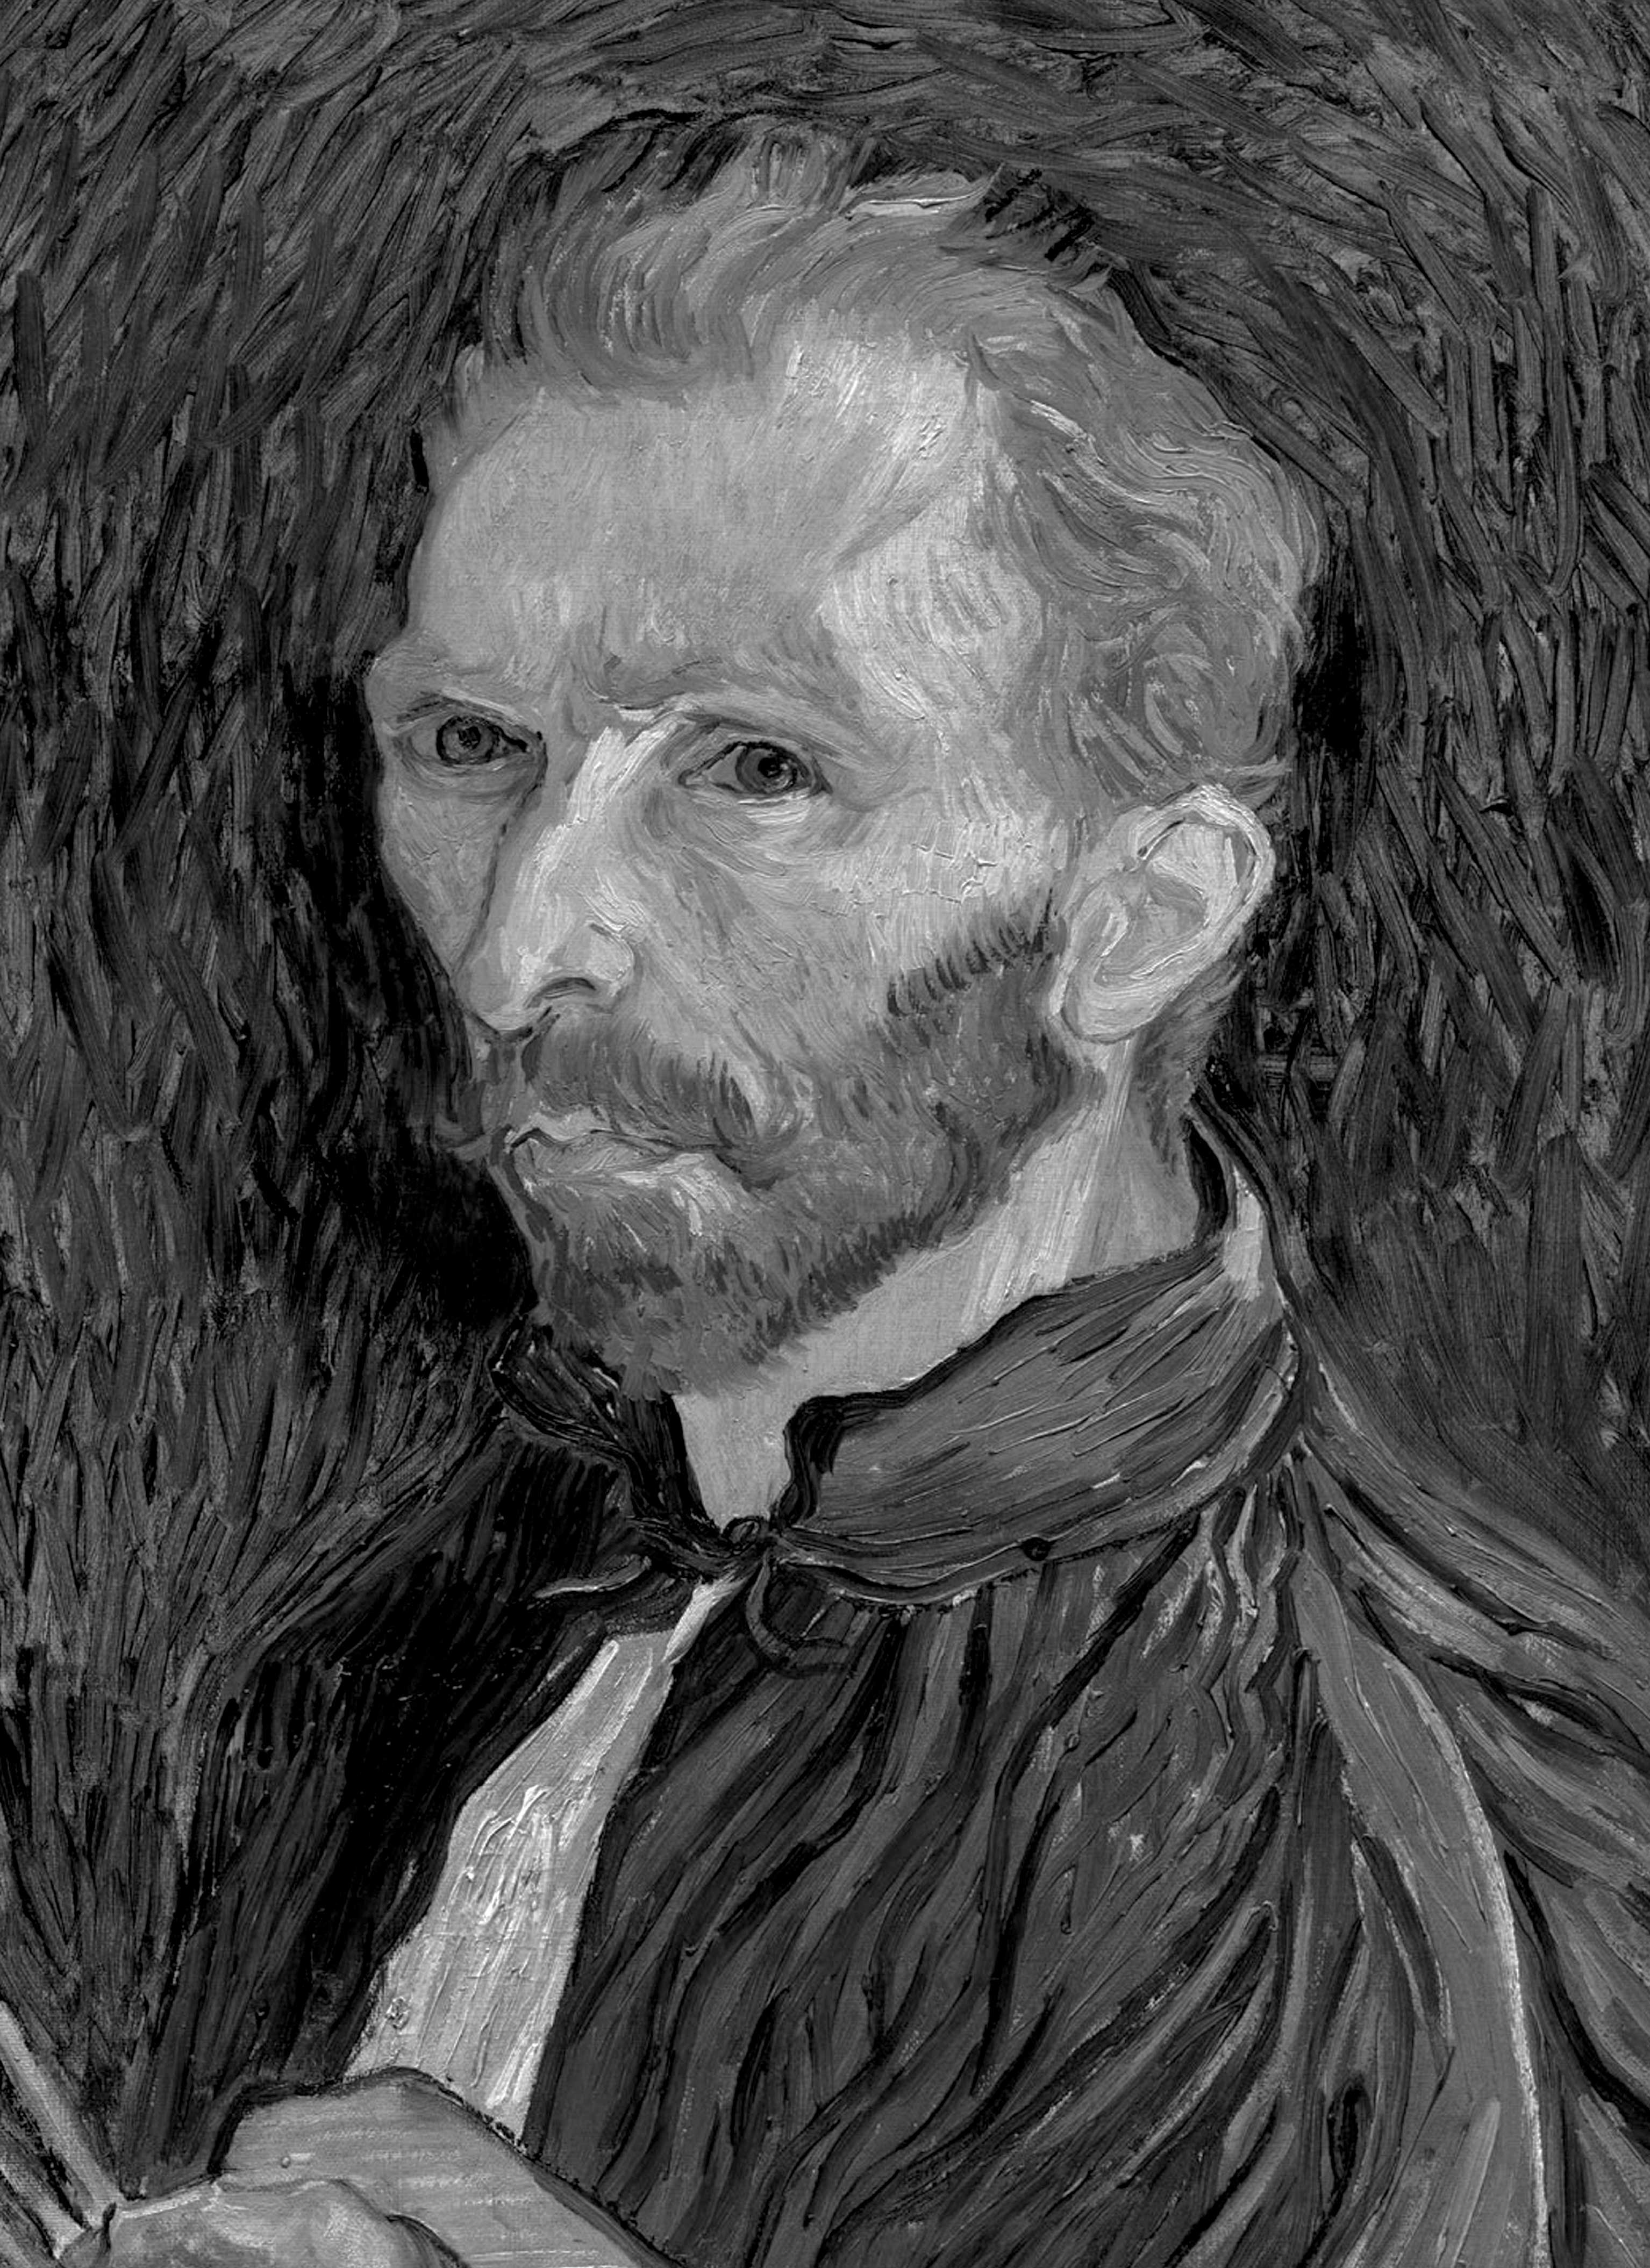 The cover of our newly updated monograph, featuring Van Gogh's famous 1889 self portrait